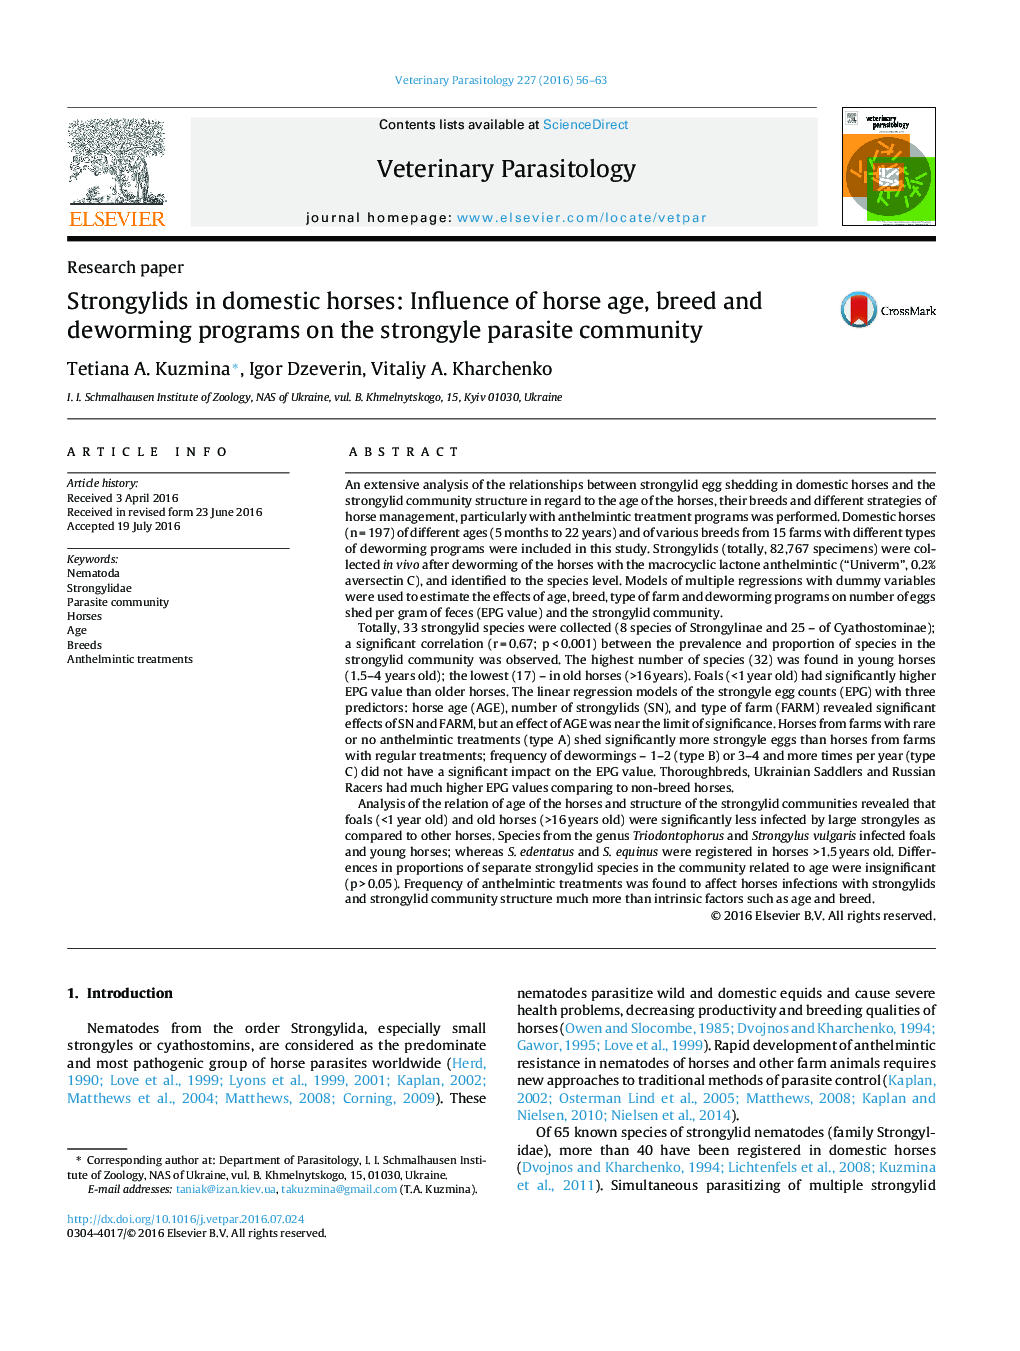 Strongylids in domestic horses: Influence of horse age, breed and deworming programs on the strongyle parasite community